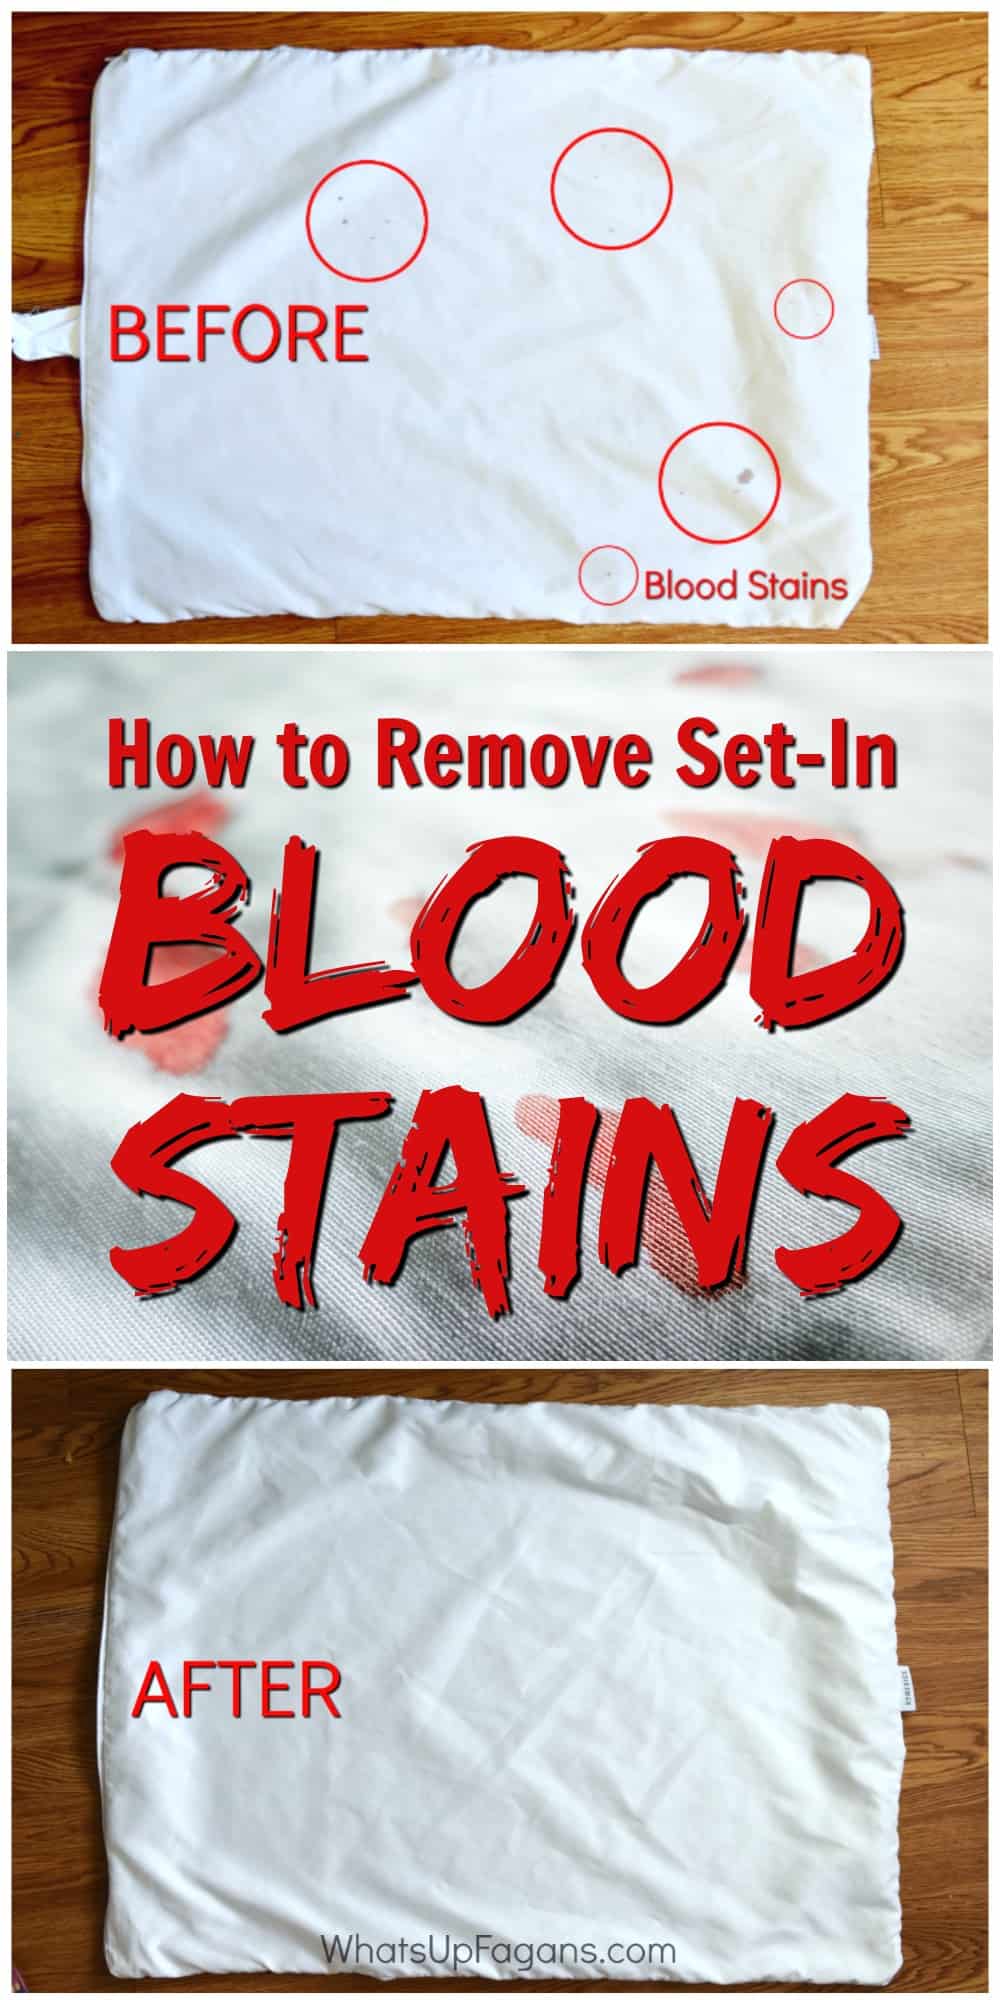 Getting rid of blood stains